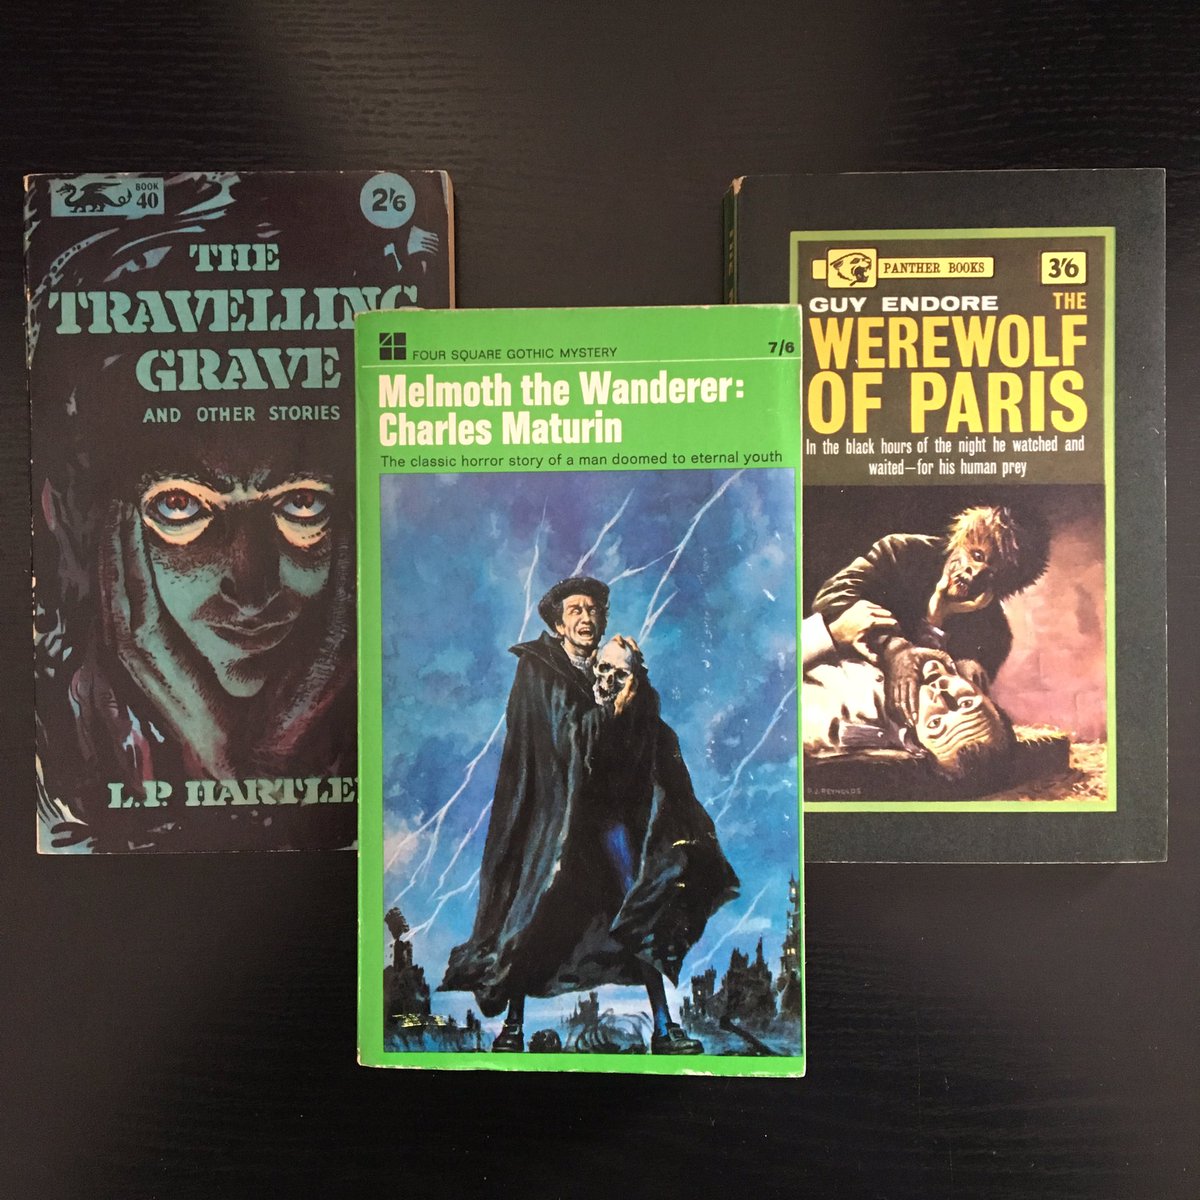 A trio of hard to find classics and all 1st paperback editions.
alldatalostbooks.co.uk
#hplovecraft #weirdtales #horror #goodreads #weirdfiction #whattoread #horrorbooks #vintagehorror #horrorfiction  #alldatalostbooks #bookish #werewolf #lphartley #guyendore #charlesmaturin